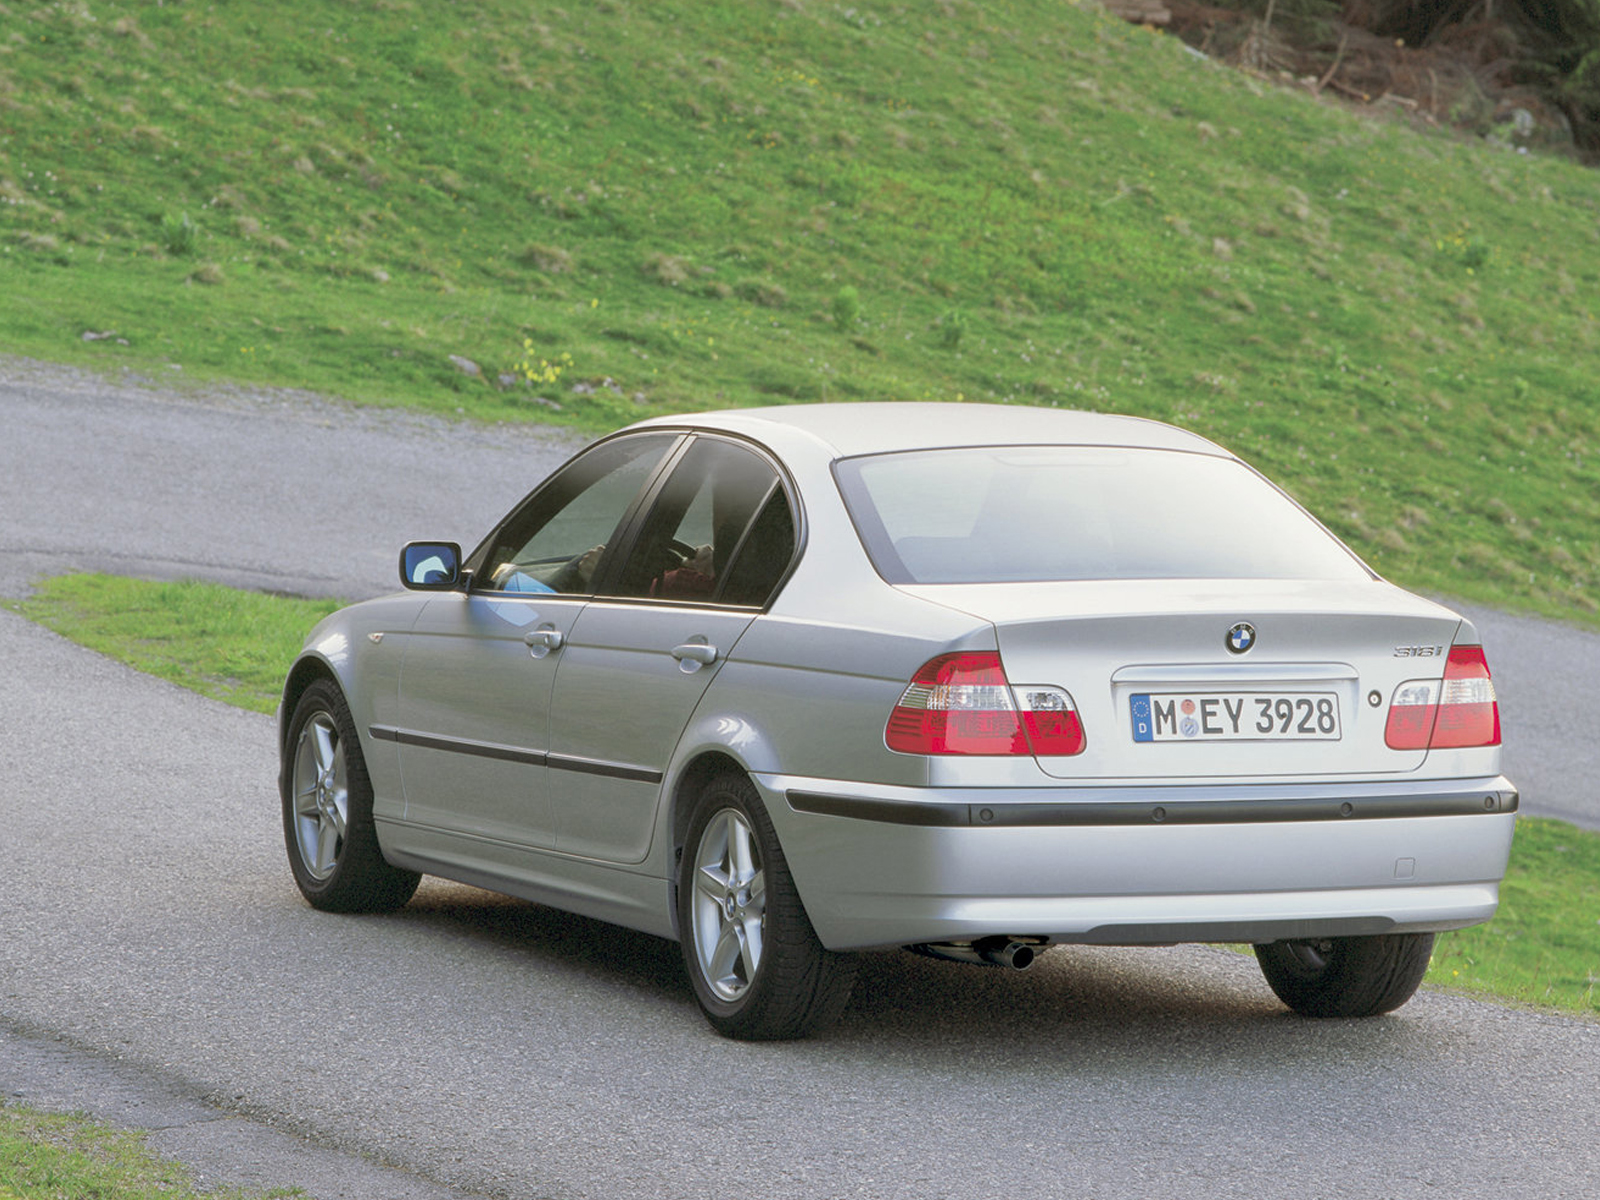 1998 bmw 3 series 323i - Motorcycle Pictures